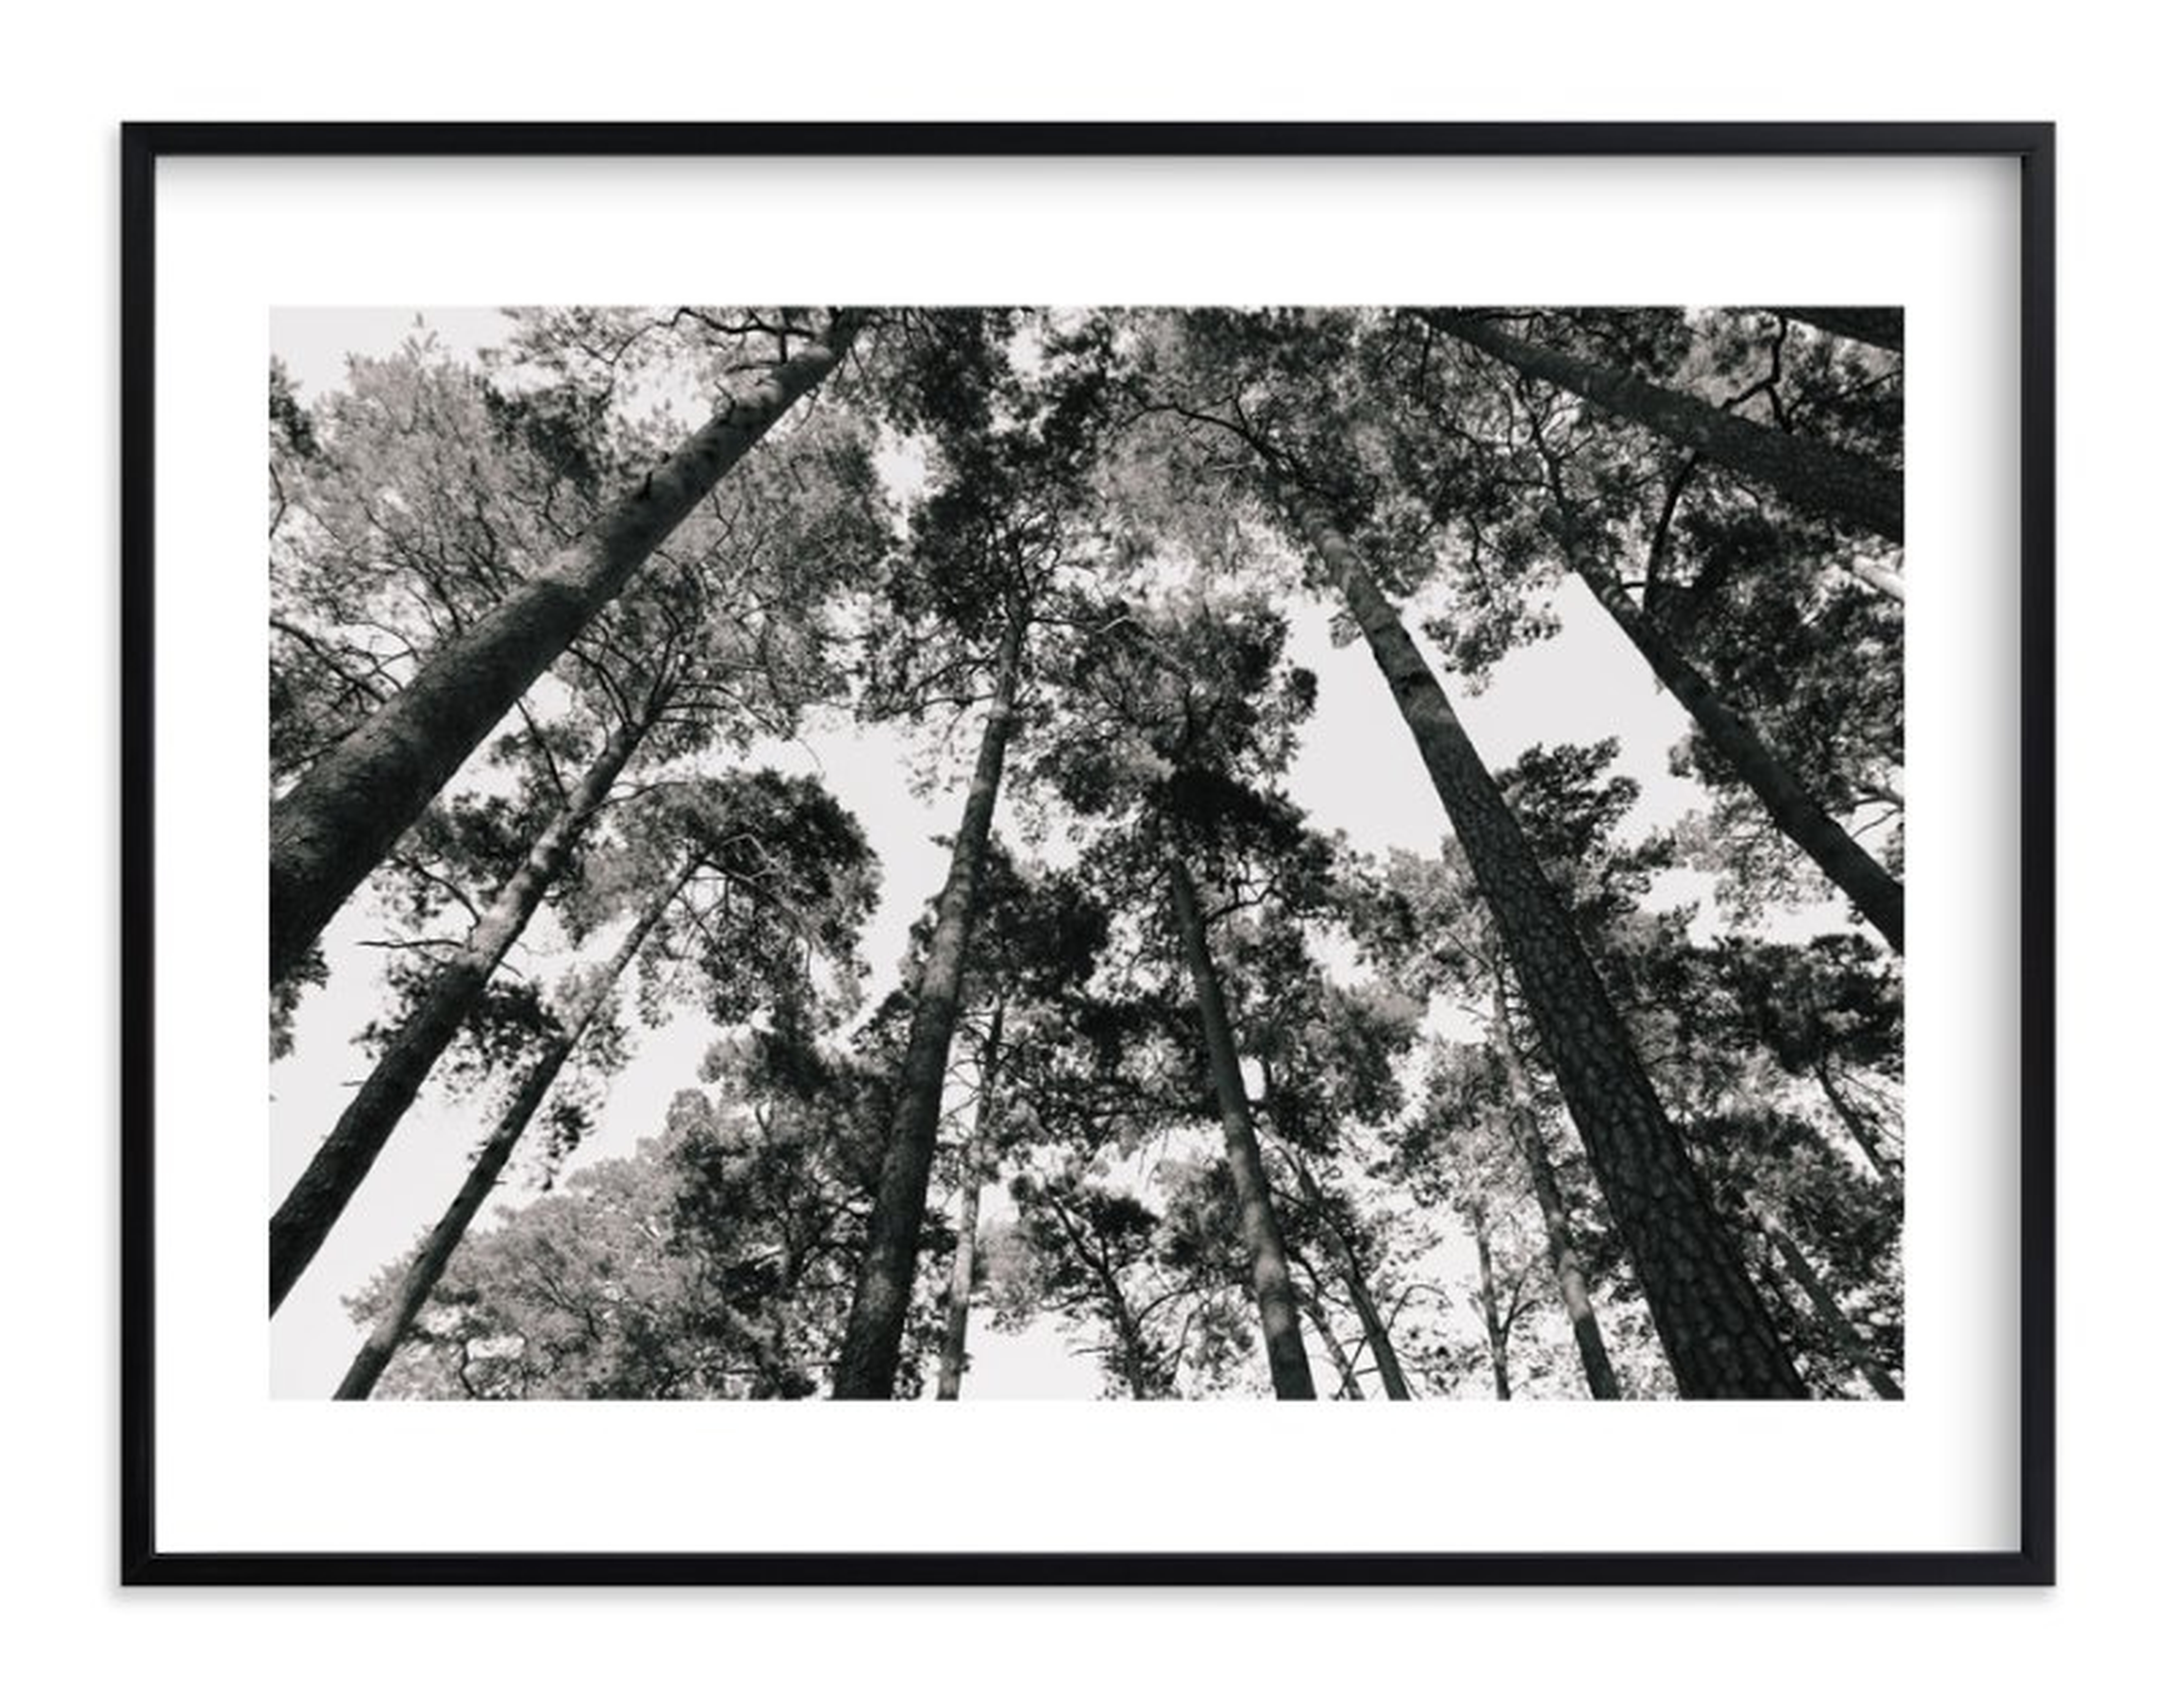 In the Woods - 40"x30" with white border - Minted